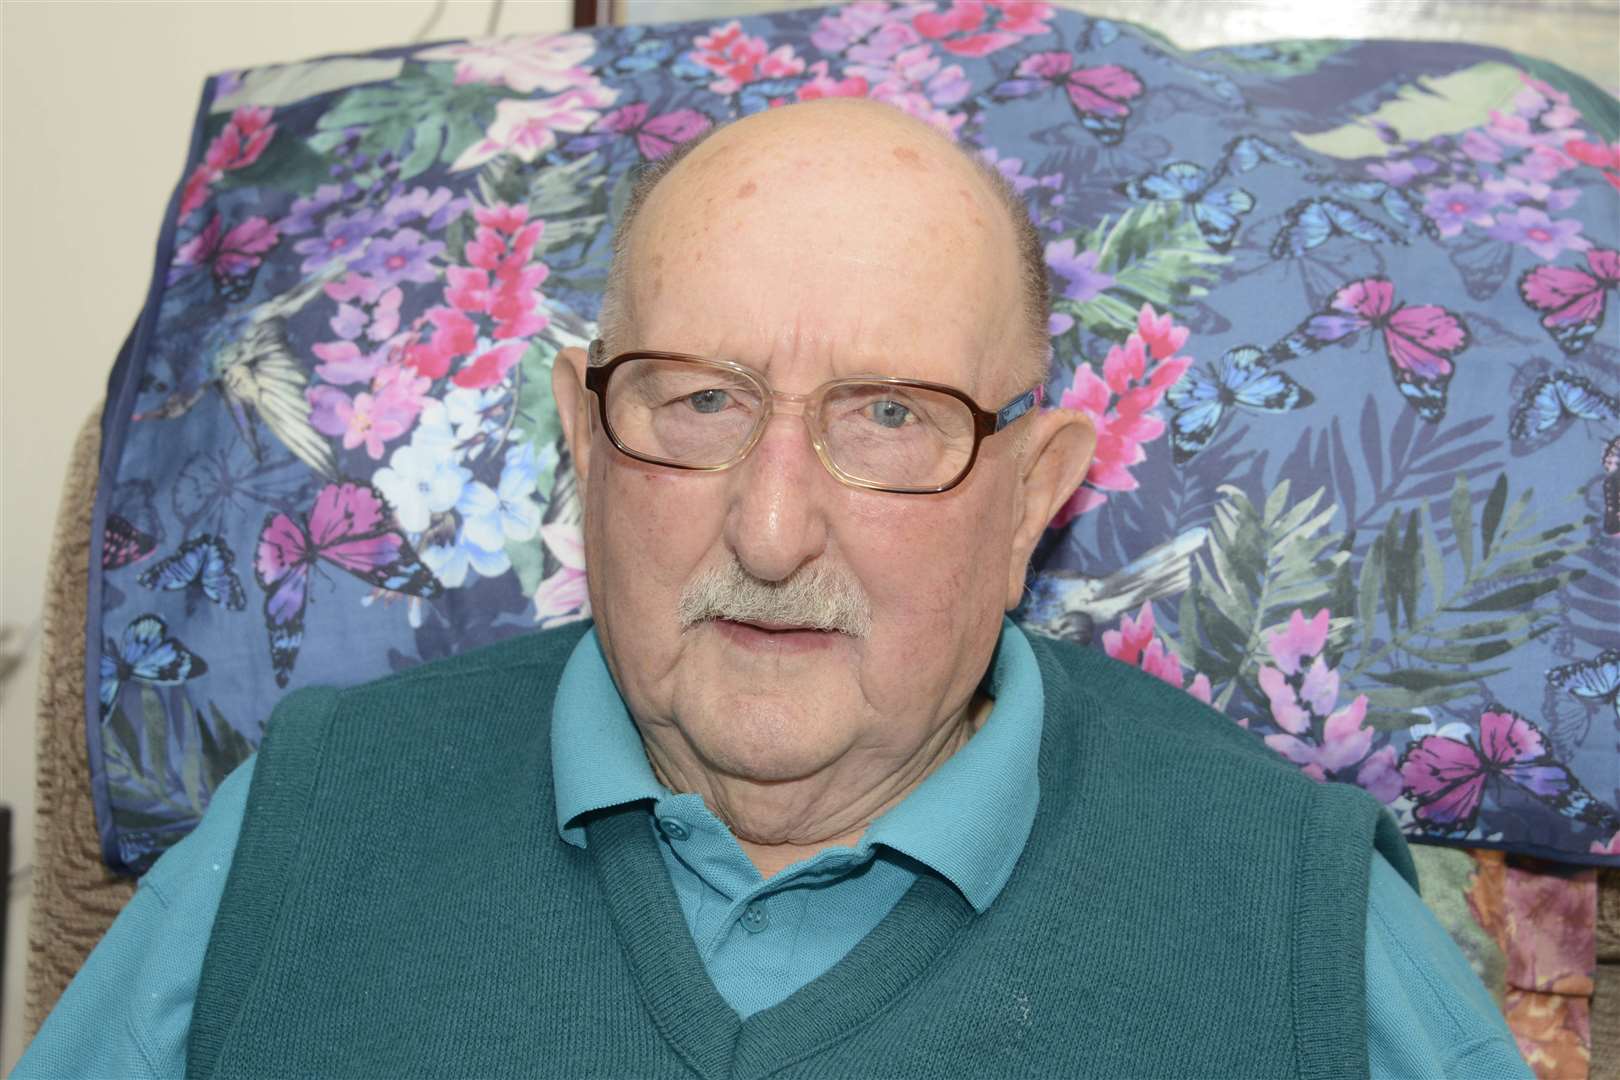 Peter Rainer, now 92, previously lived in Kennington